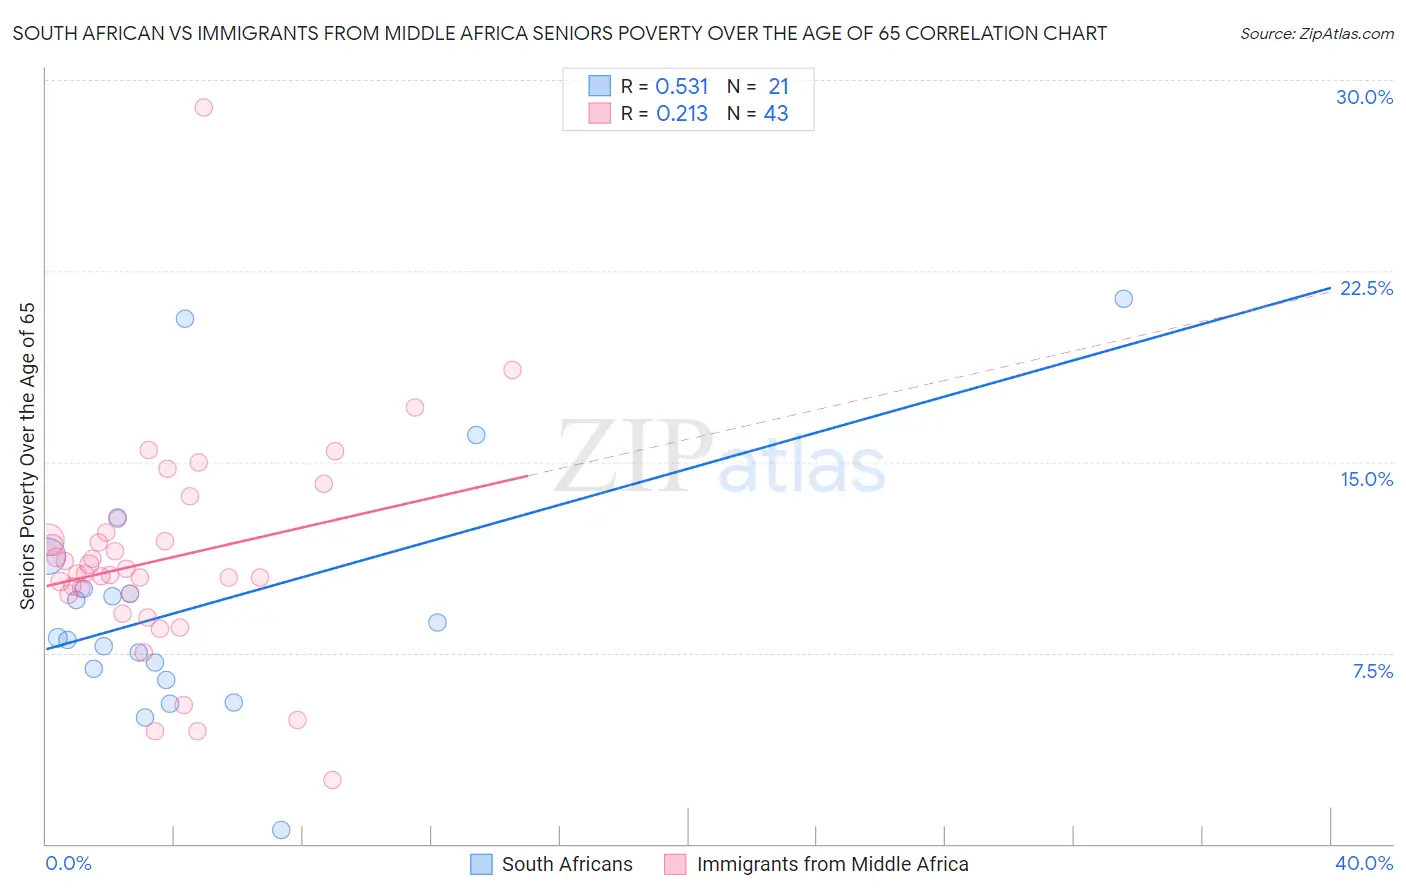 South African vs Immigrants from Middle Africa Seniors Poverty Over the Age of 65